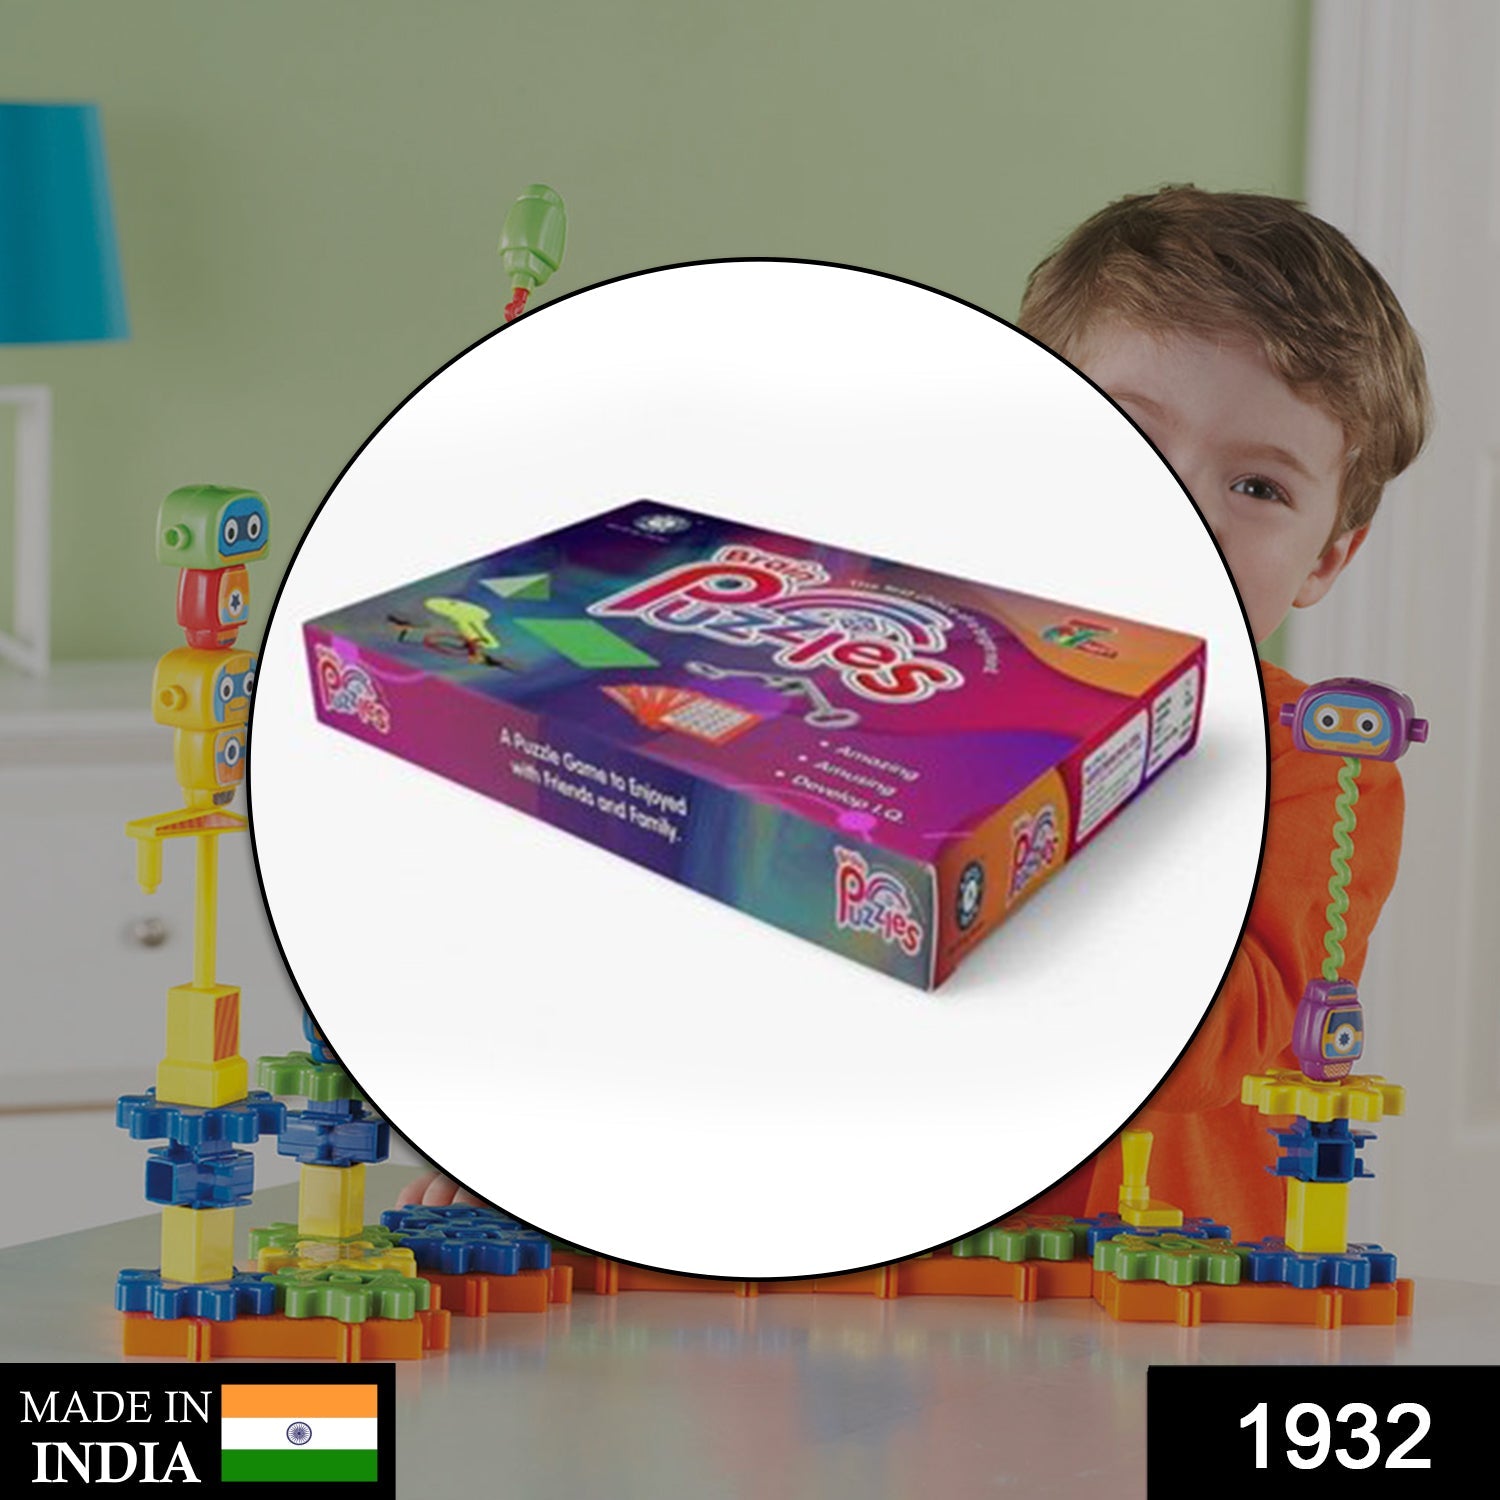 1932 AT32 Brain Puzzles and game for kids for playing and enjoying purposes.